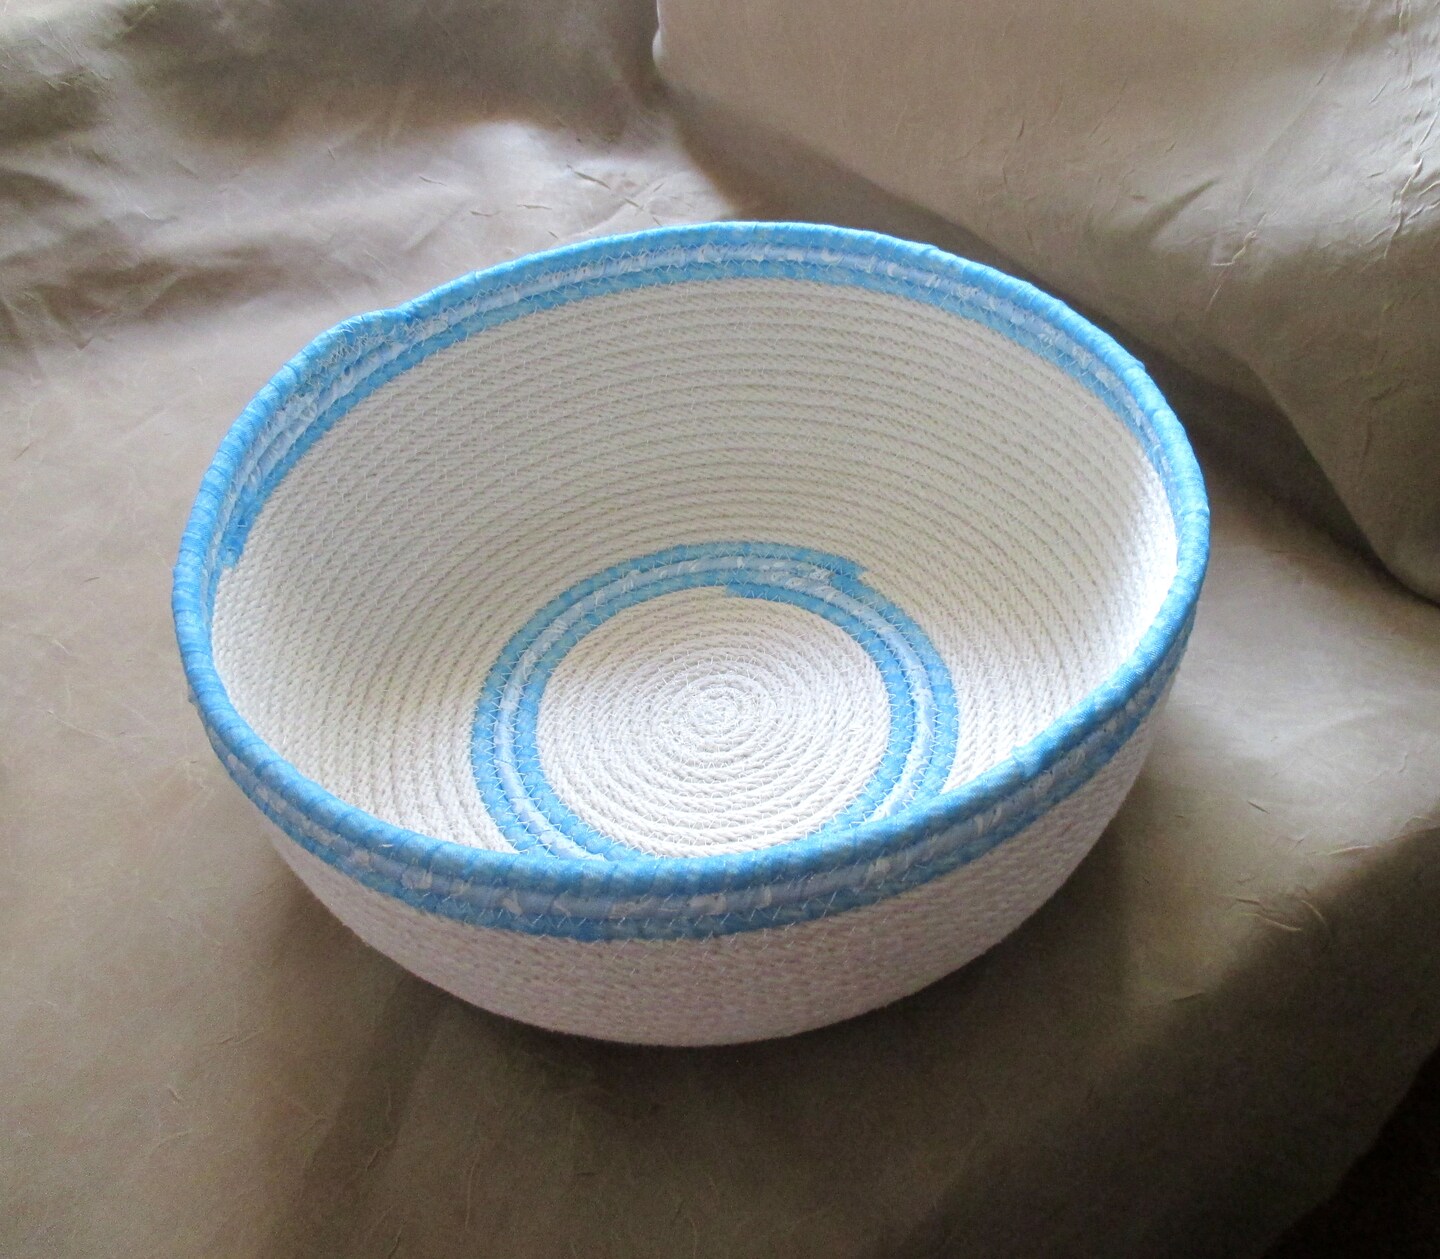 Rope Bowls, Various Sizes. Storage Bowls Made of Cotton Clothesline. Entry  Way Basket. 